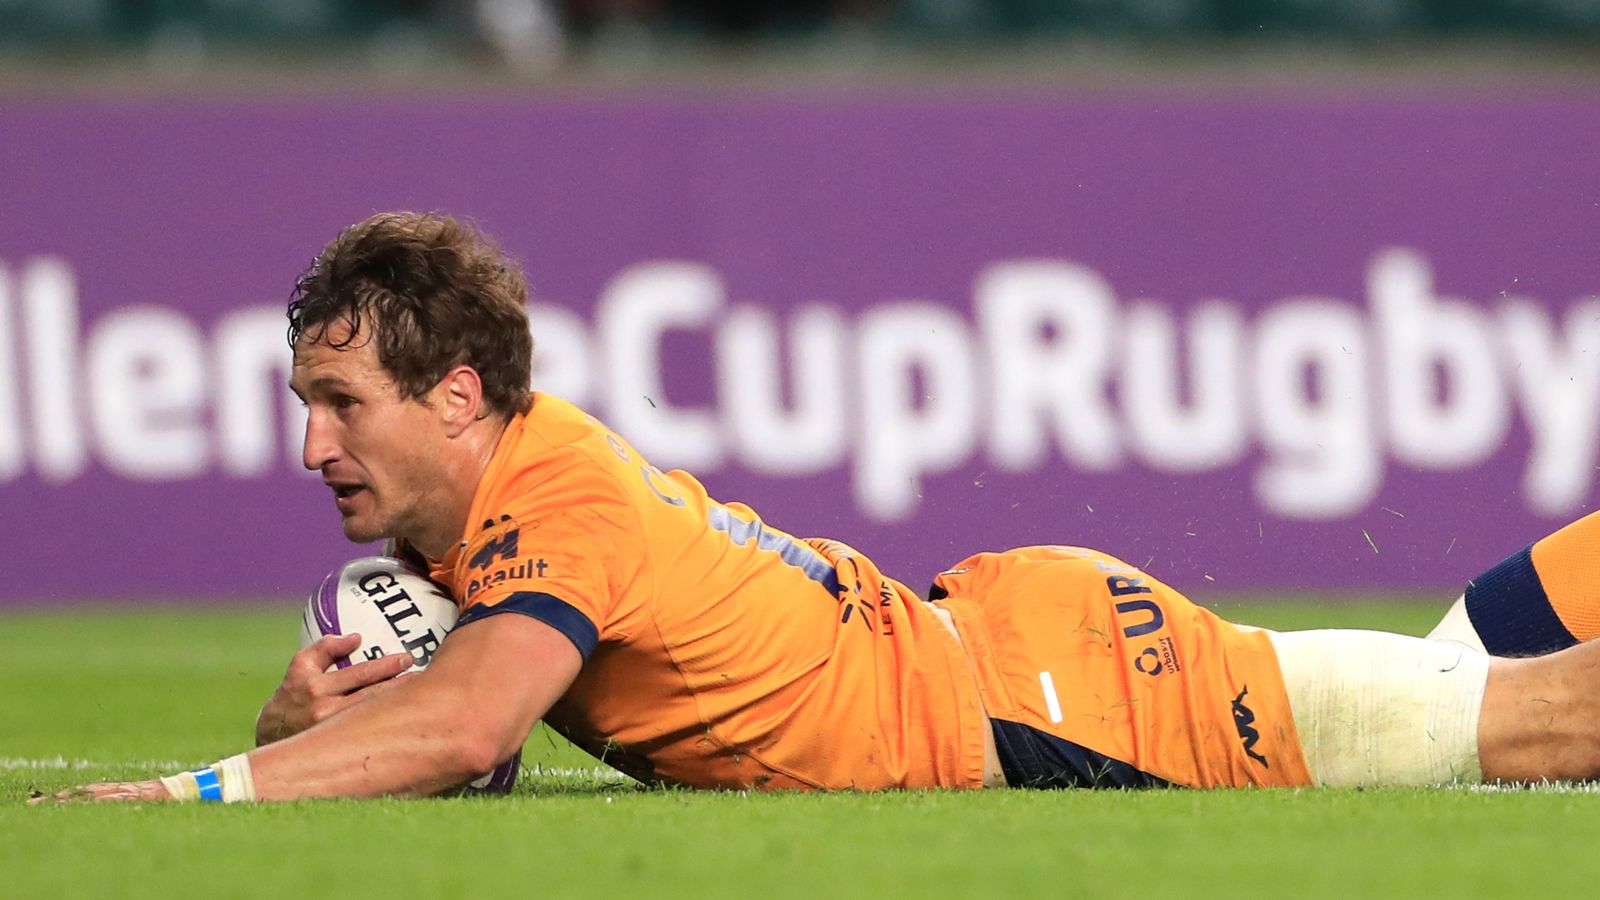 Leicester Tigers 17-18 Montpellier: Johan Goosen’s stunning team try clinches Challenge Cup title